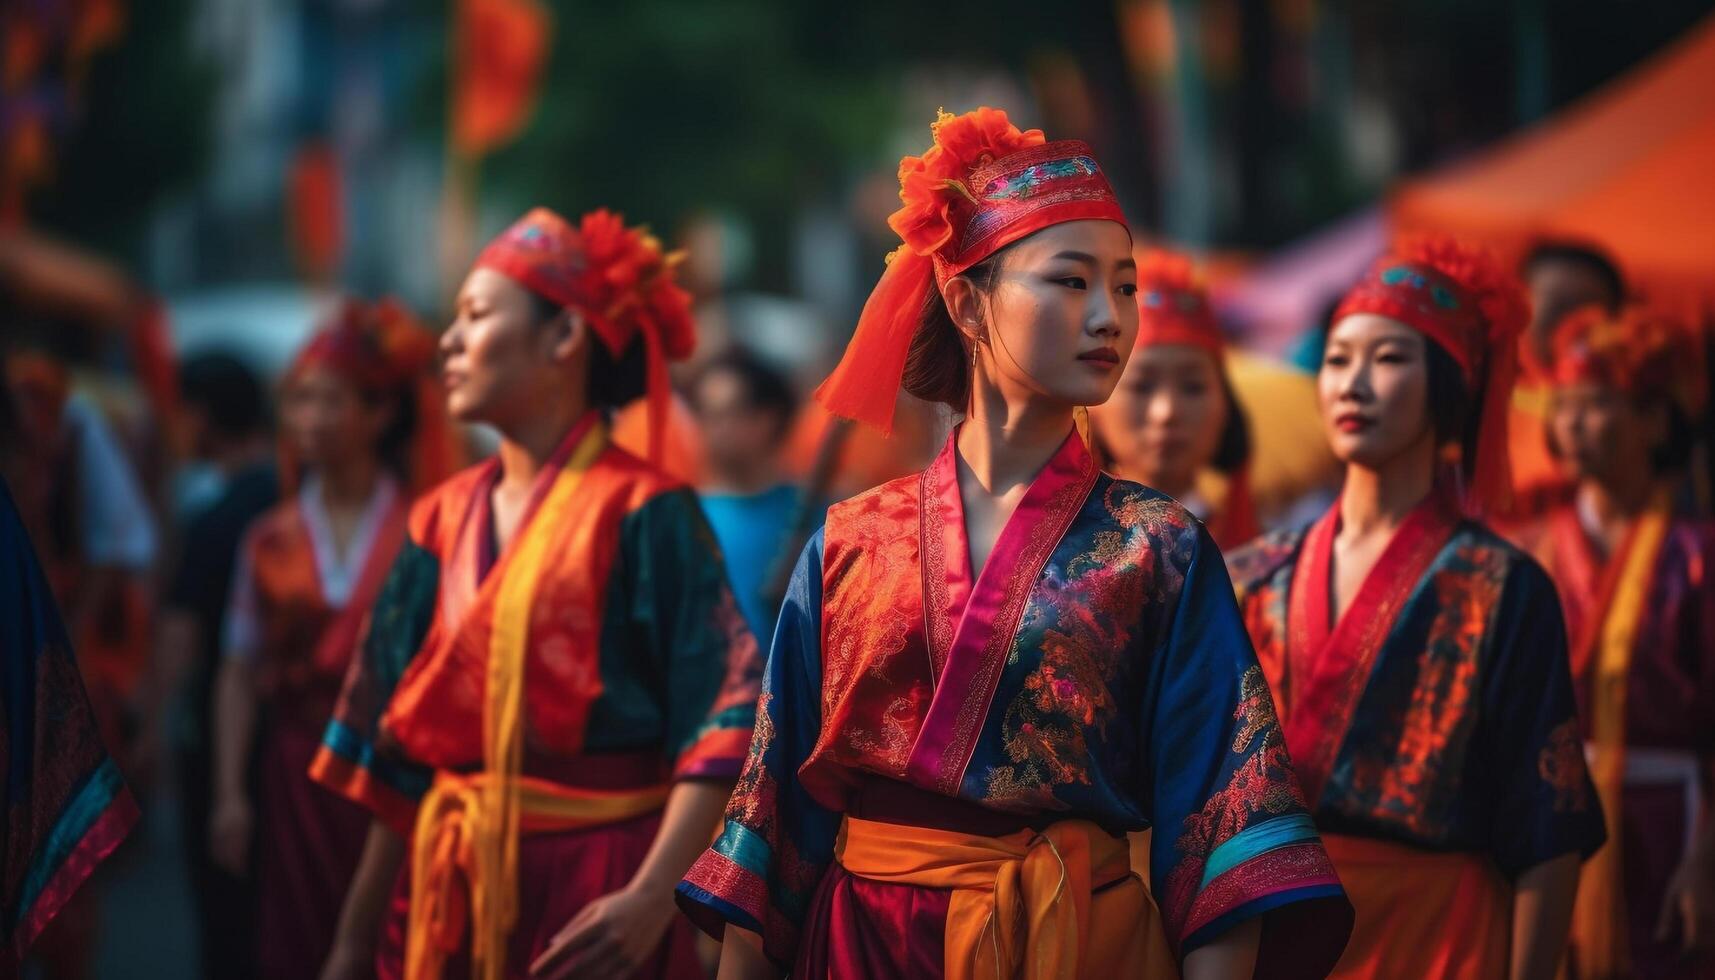 Colorful traditional festival celebrates indigenous cultures with dancing and performances generated by AI photo